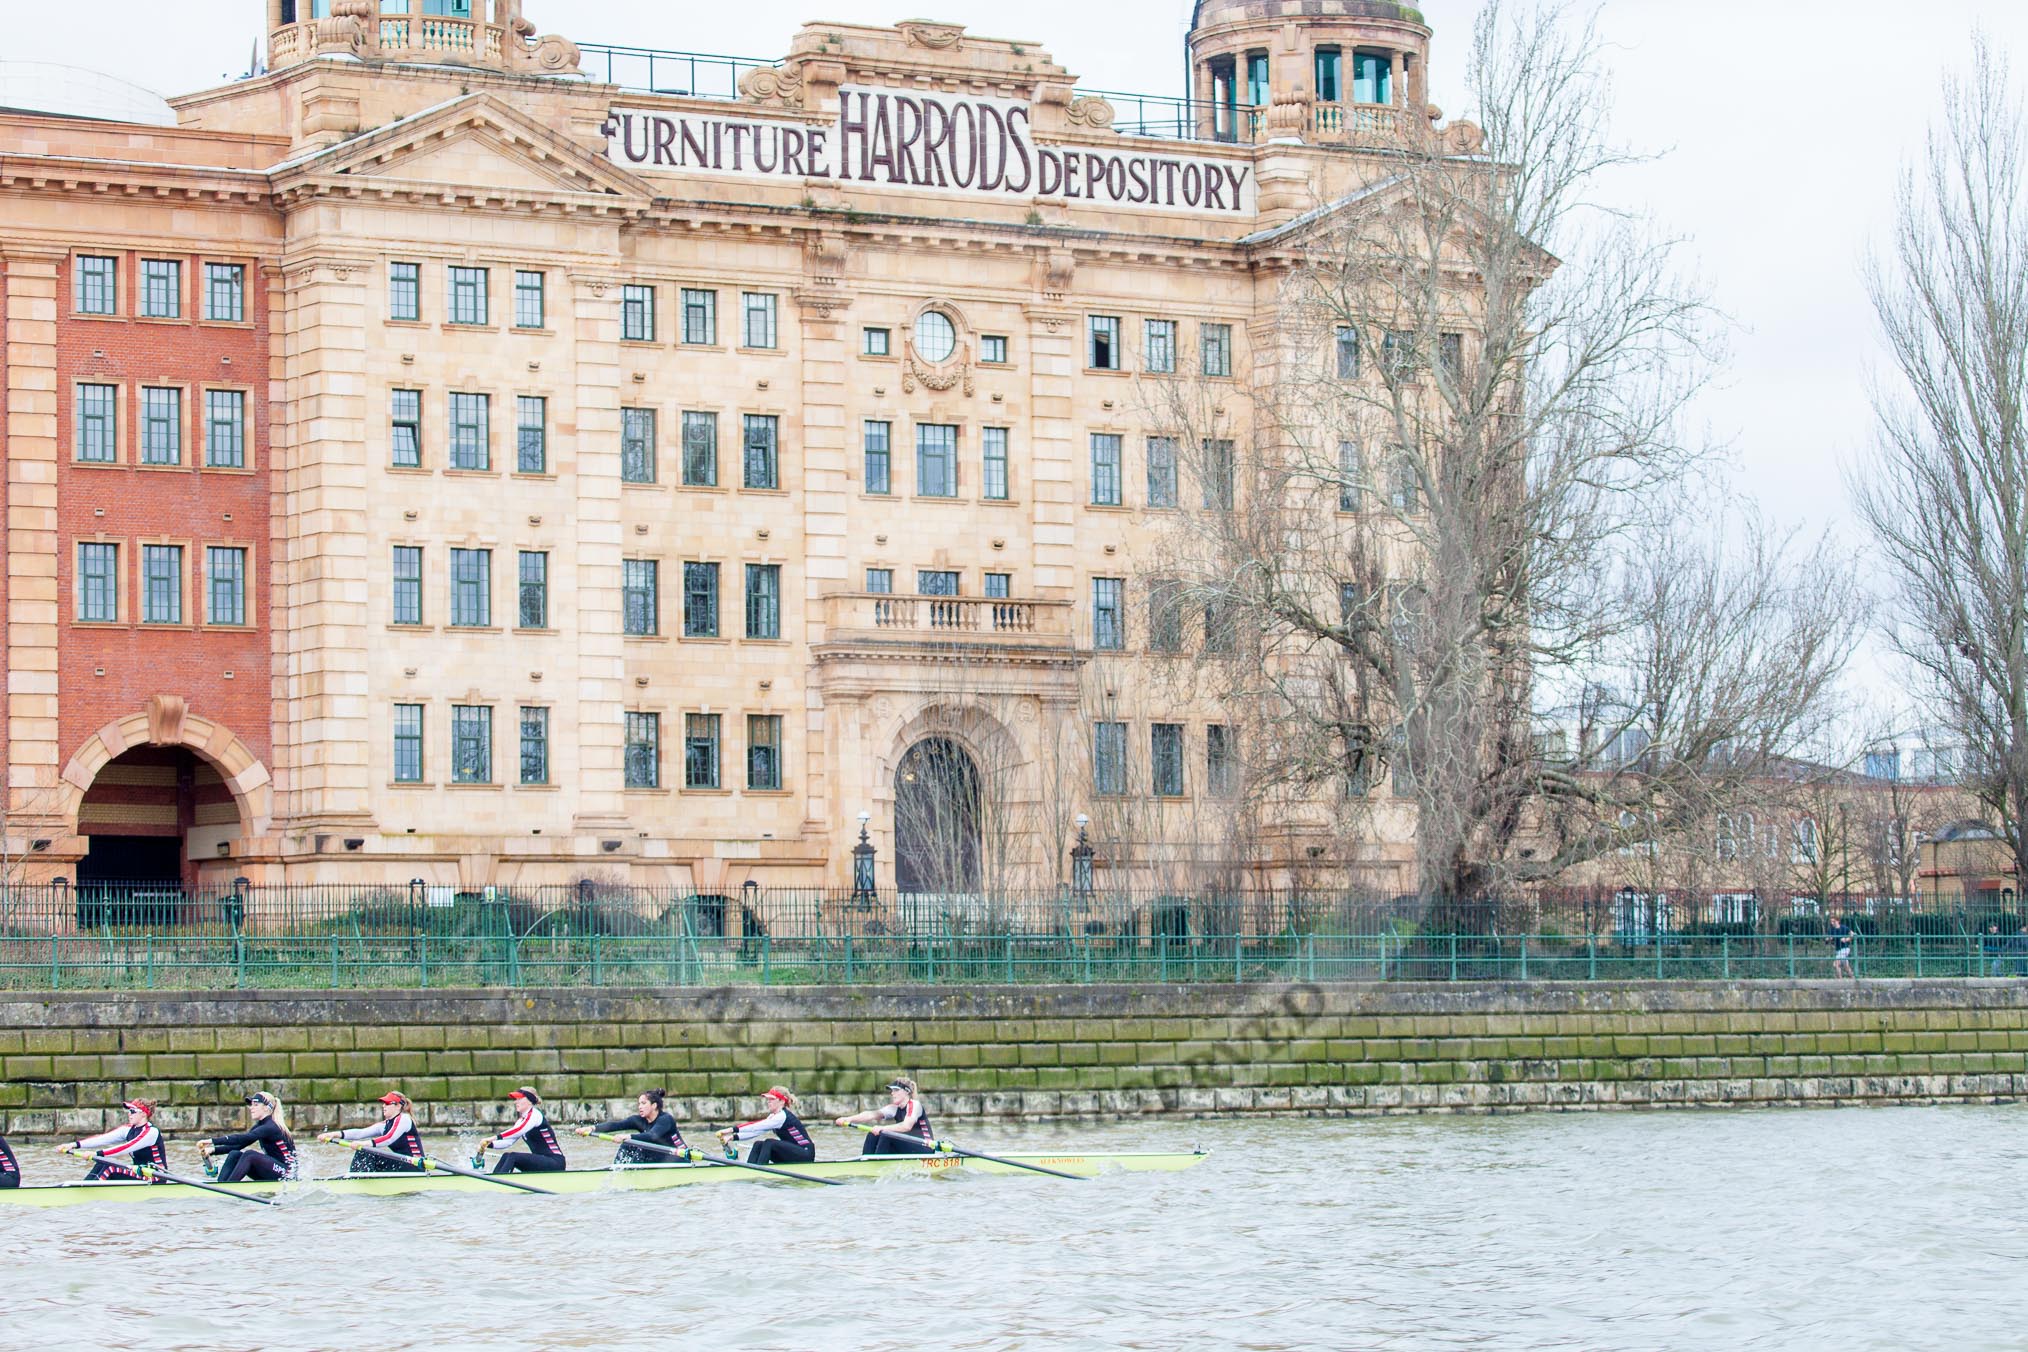 The Boat Race season 2014 - fixture CUWBC vs Thames RC: The Thames RC boat passing the Harrods Depository..




on 02 March 2014 at 13:16, image #114